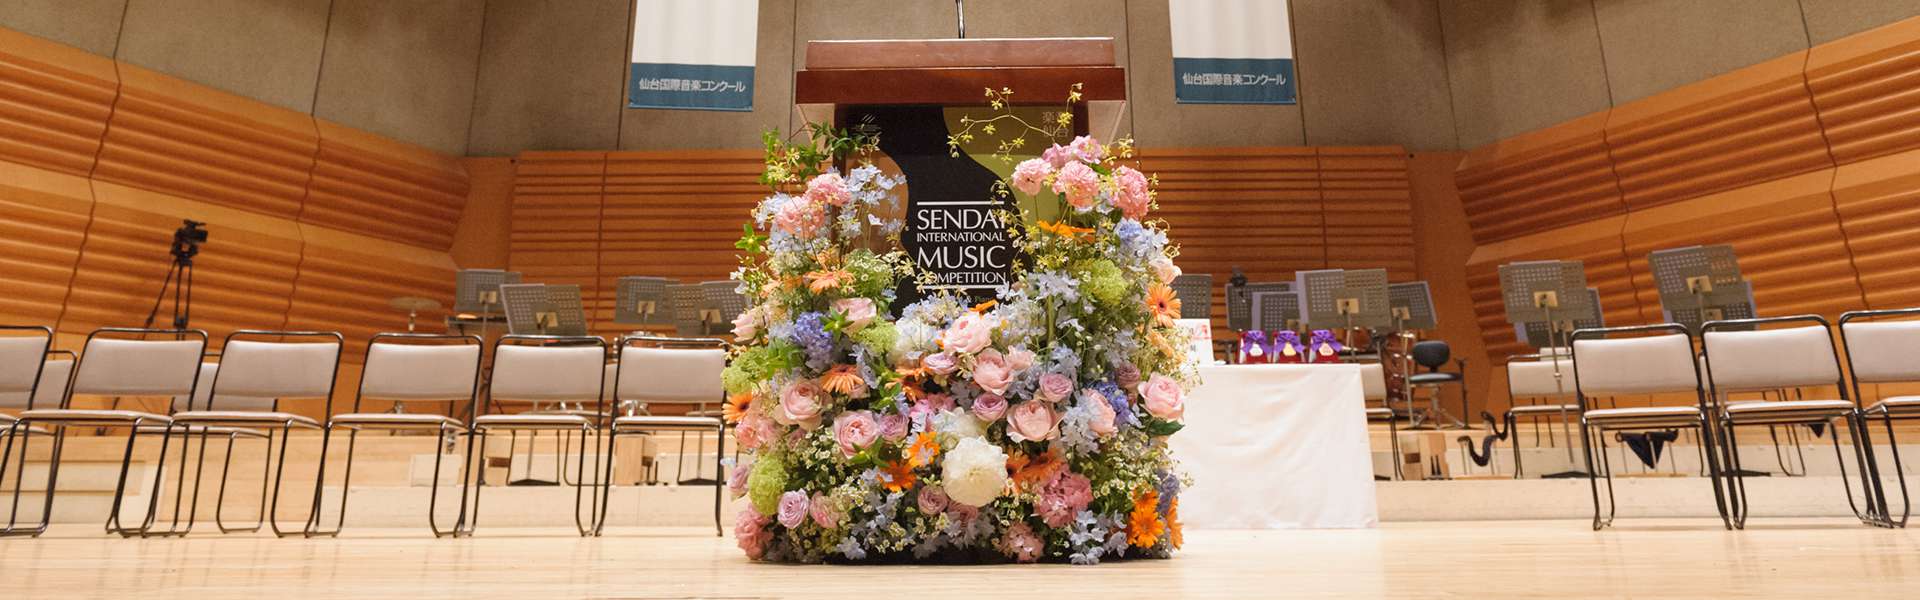 The Prizewinners of the 6th SIMC Piano Section have been announced. | Sendai International Music Competition Official Website